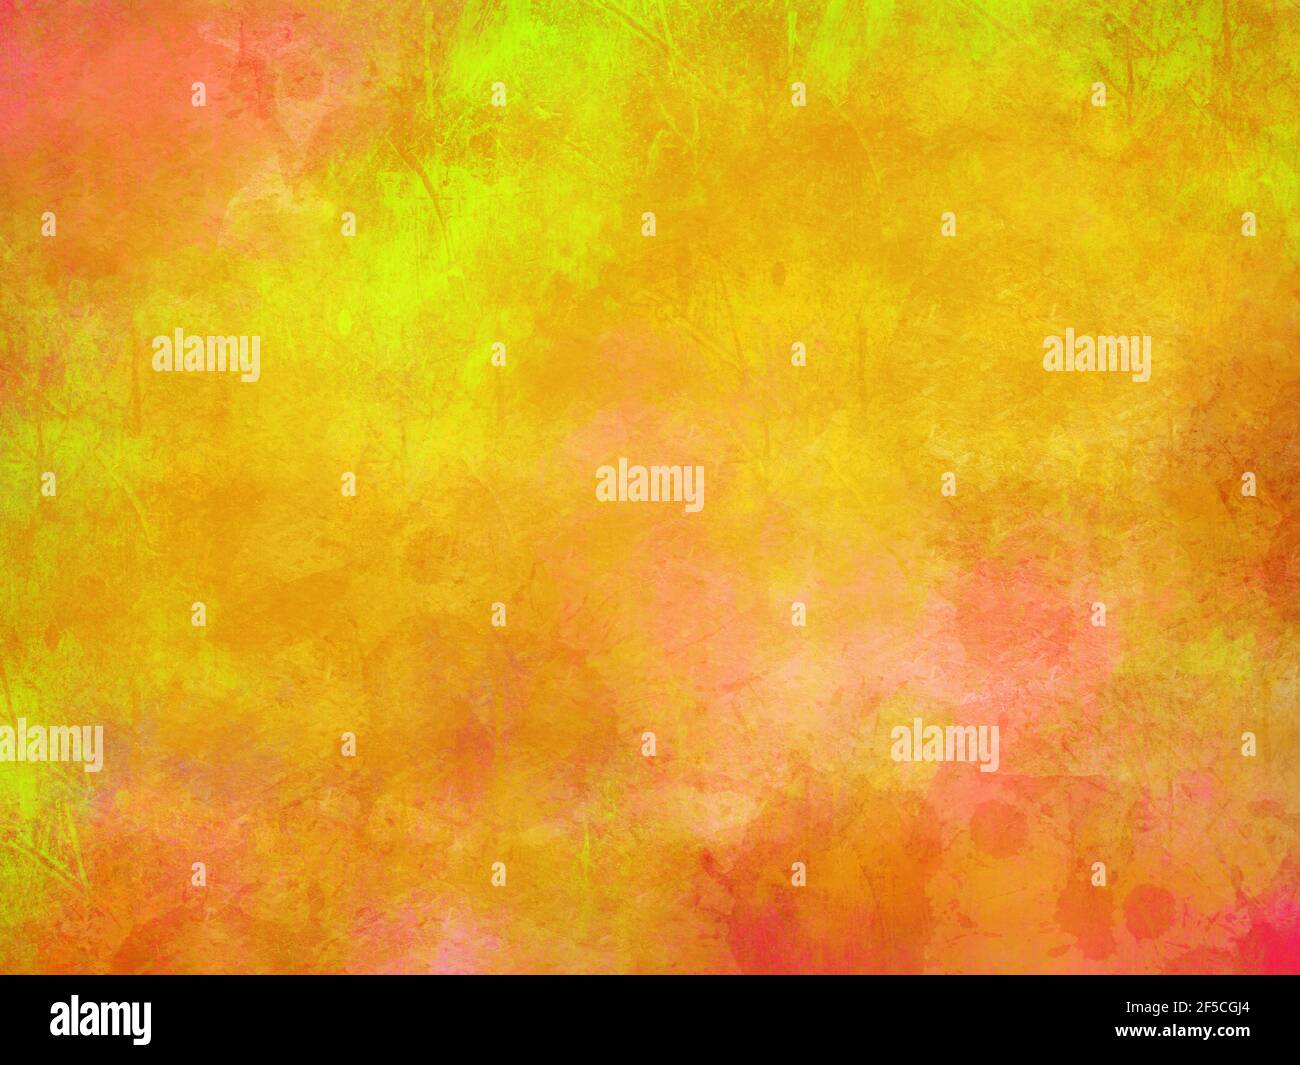 Template background old paper papyrus plaster gift timeless decorative blur  old yellowed grunge brown neon yellow green pink classy vintage clouds  Stock Photo - Alamy